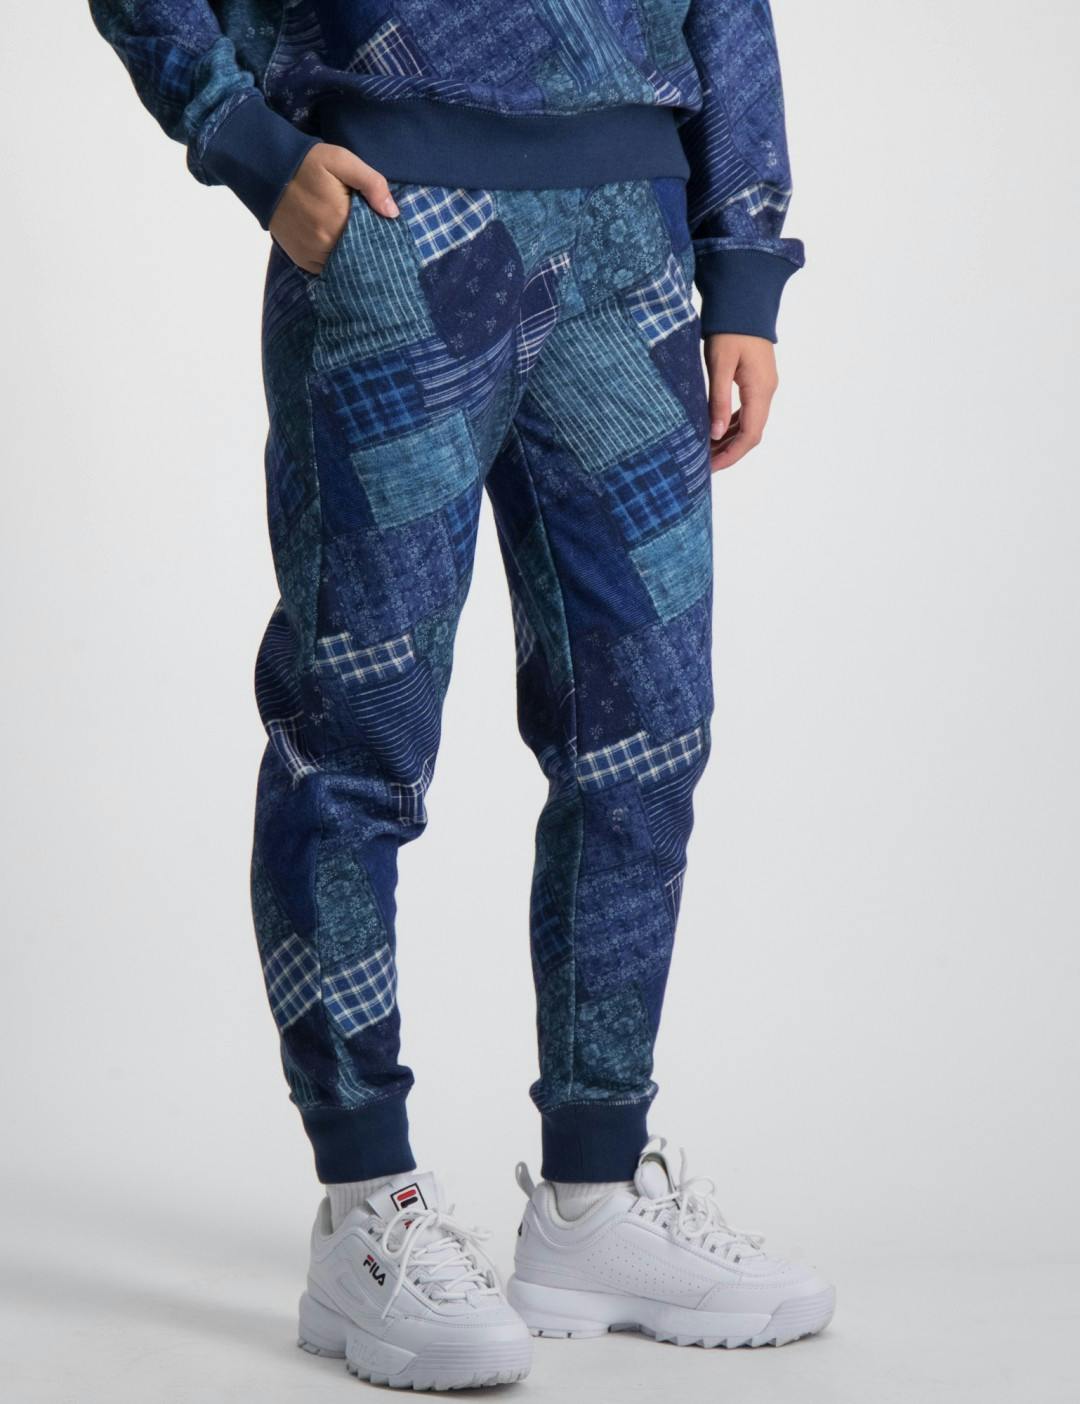 Patchwork-Print French Terry Joggers